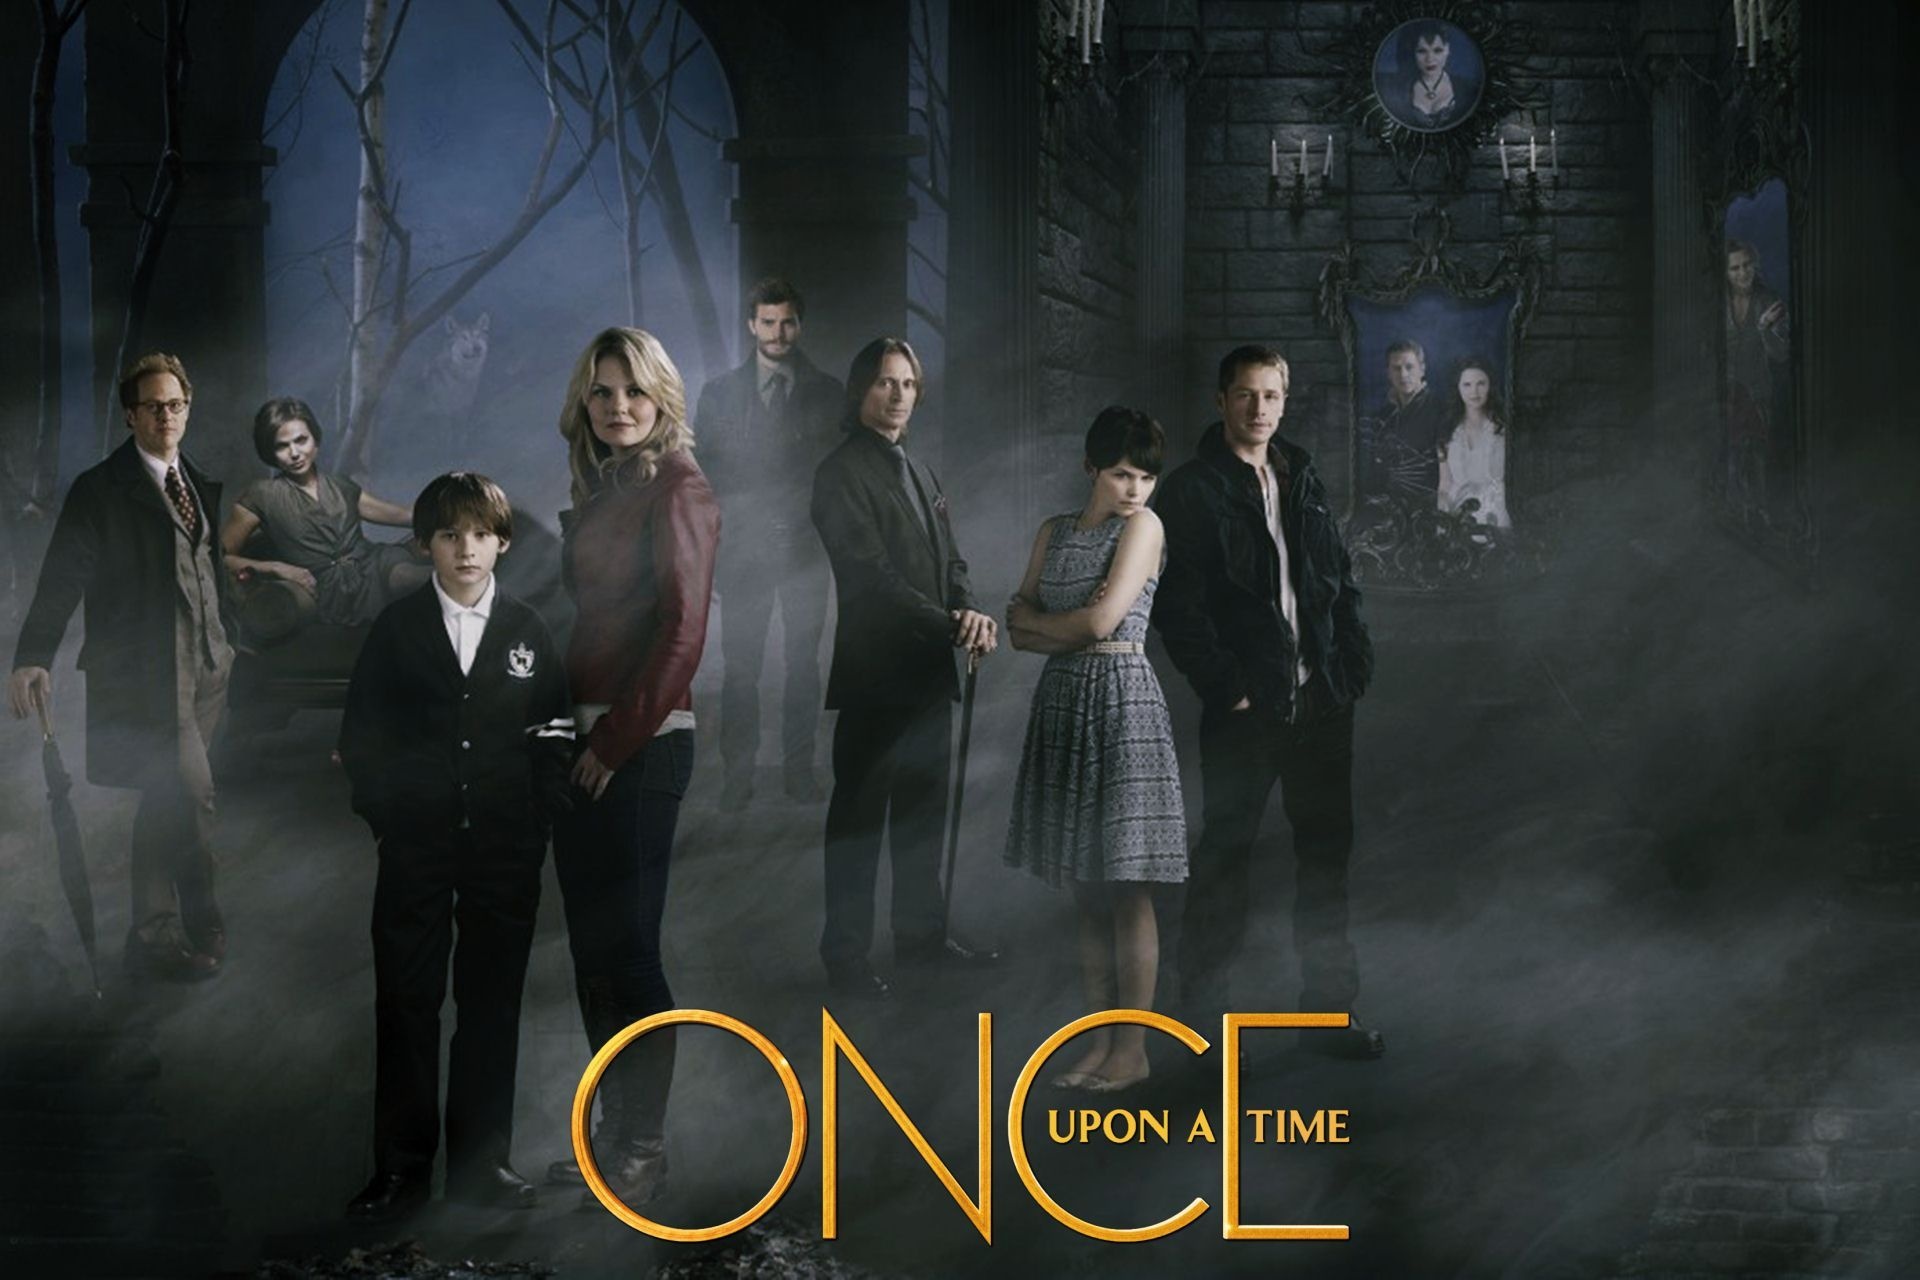 Once Upon a Time Wallpapers - Top Free Once Upon a Time Backgrounds 1920x1280